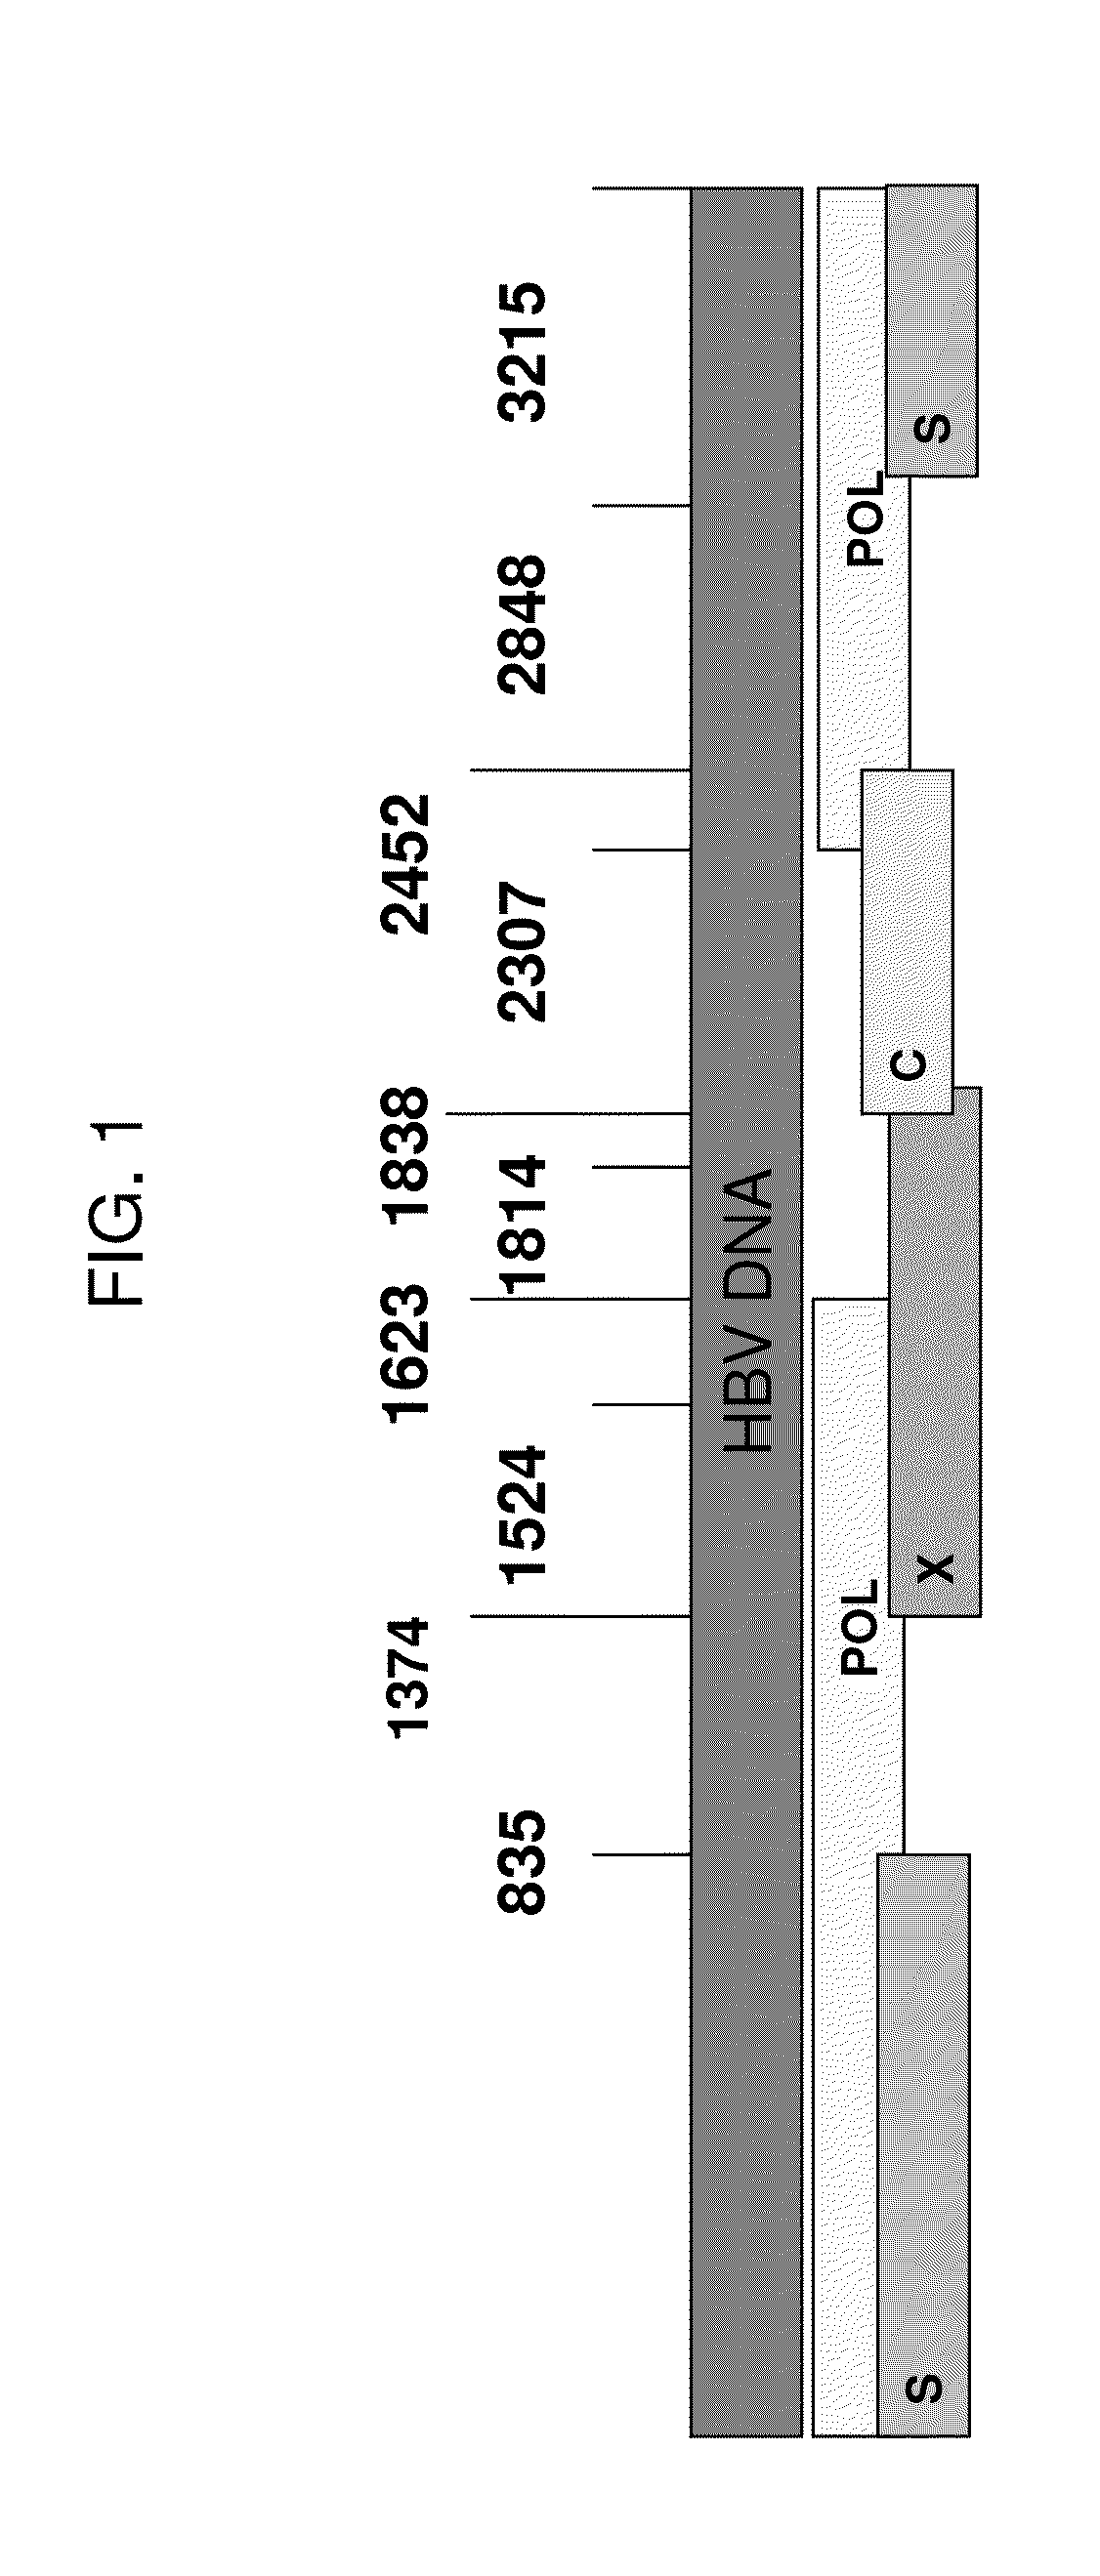 Compositions and Methods for the Treatment or Prevention of Hepatitis B Virus Infection